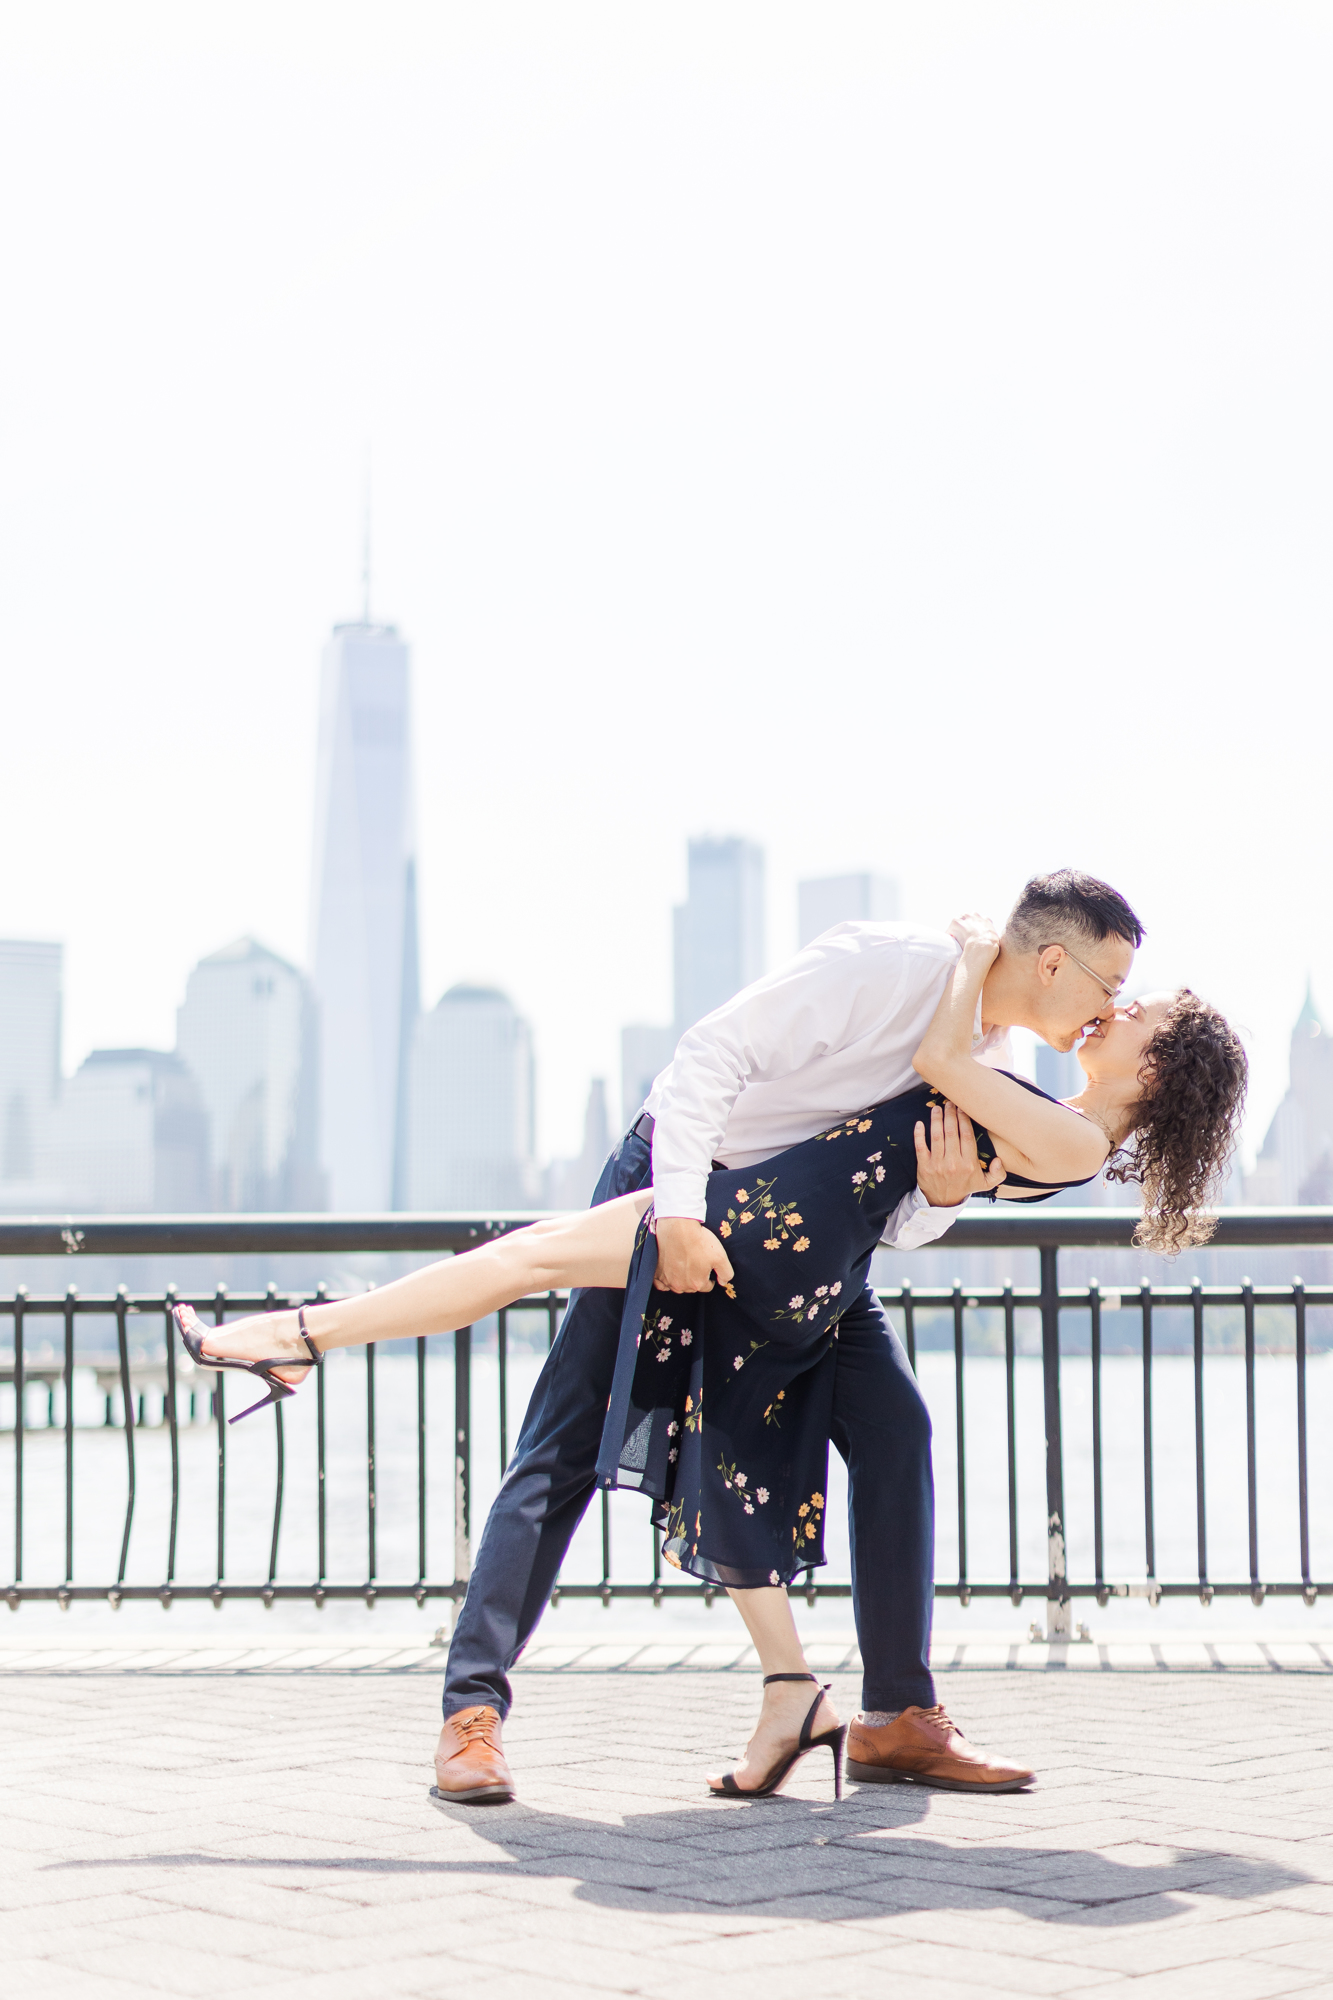 Pretty Skyline Engagement Photos in Jersey City